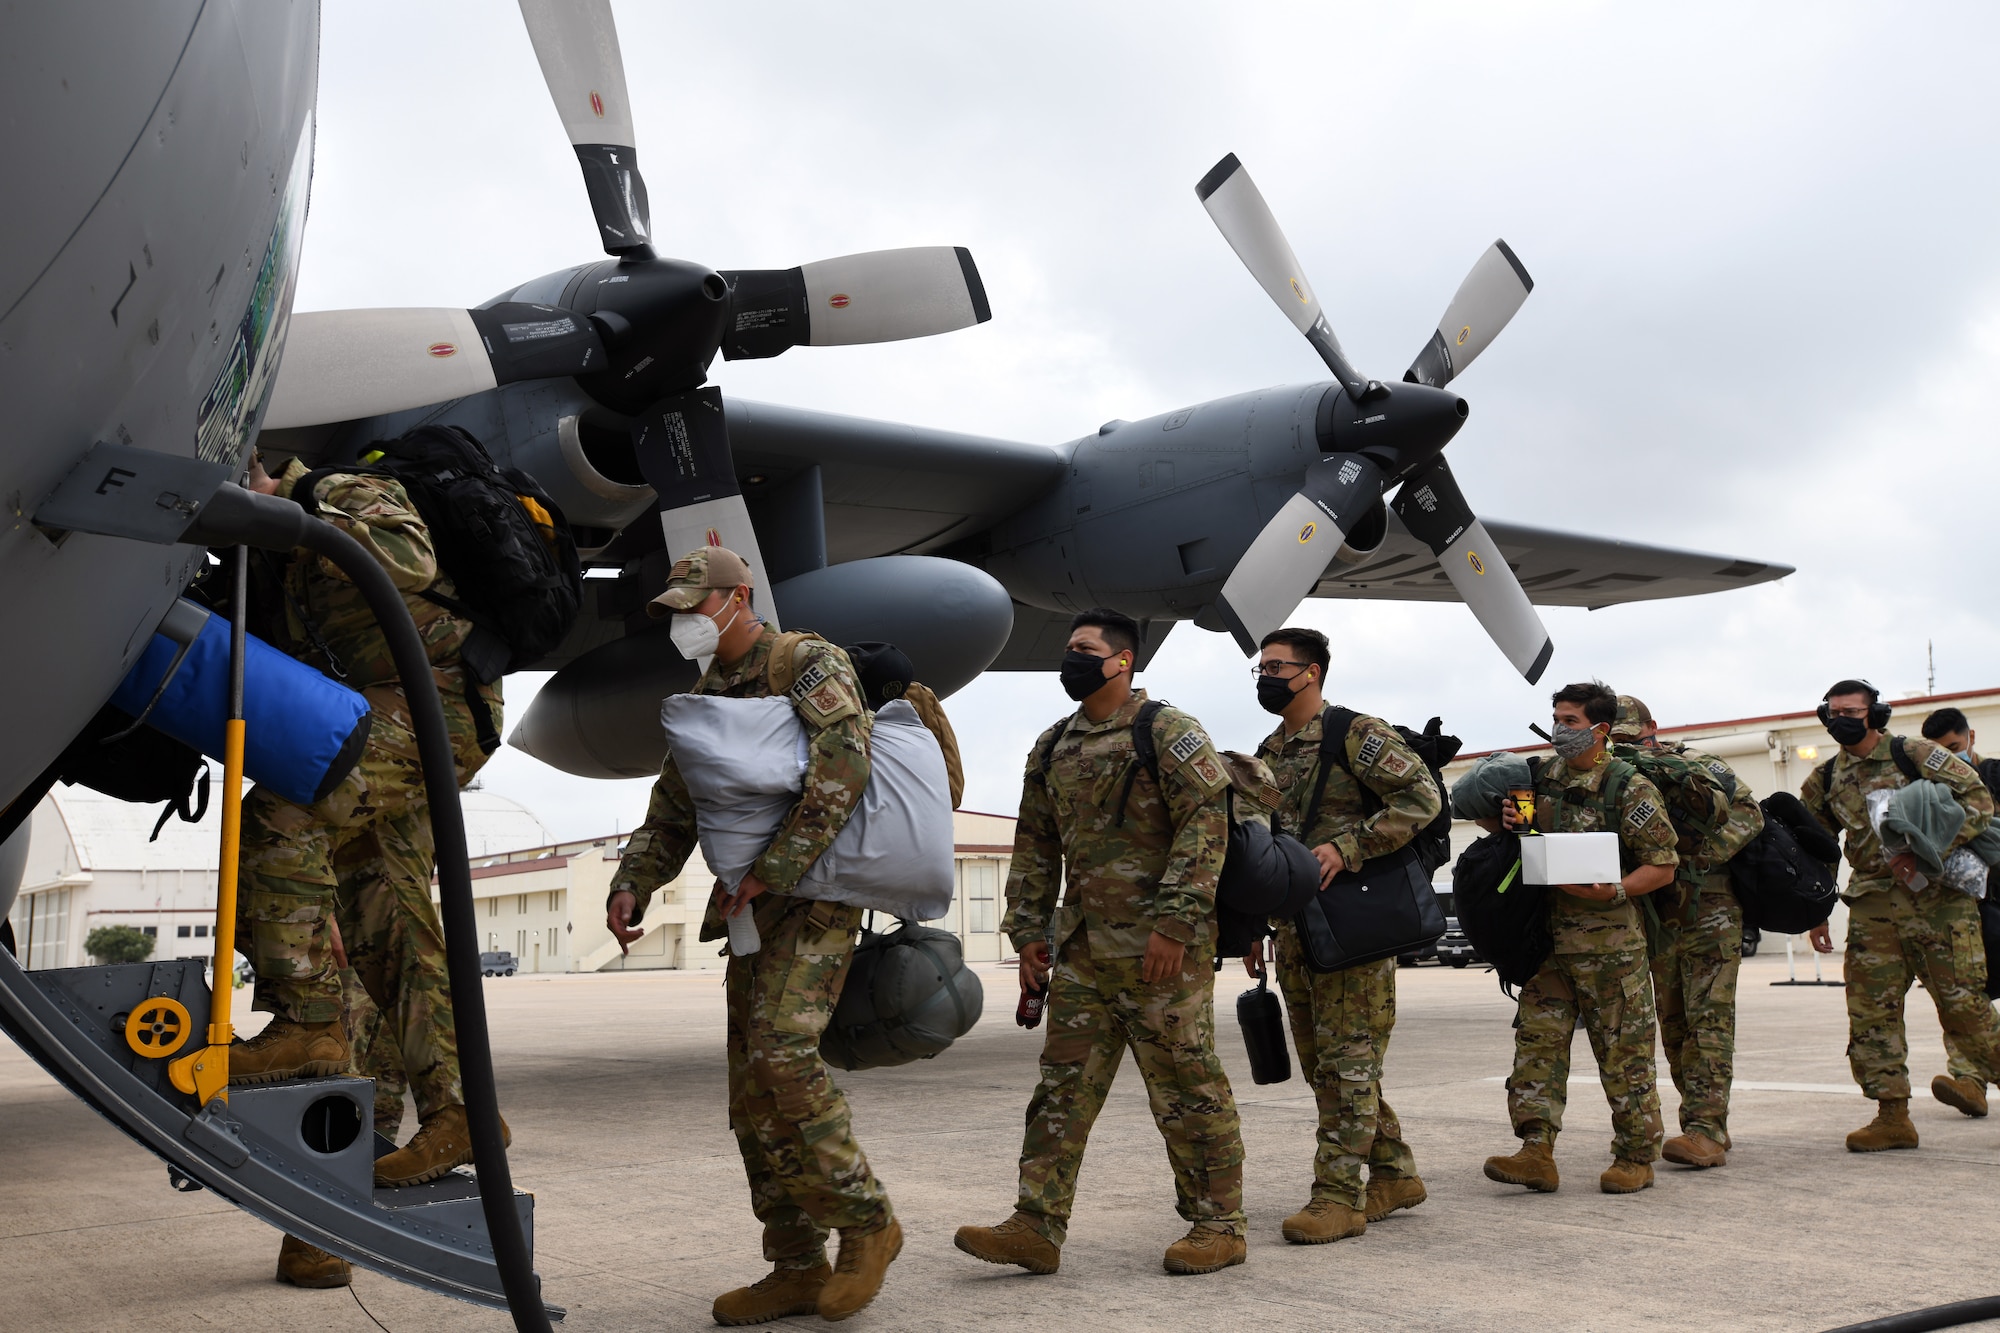 433rd Civil Engineer Squadron firefighters board a C-130H Hercules cargo aircraft June 28, 2020 at Joint Base San Antonio-Lackland, Texas.